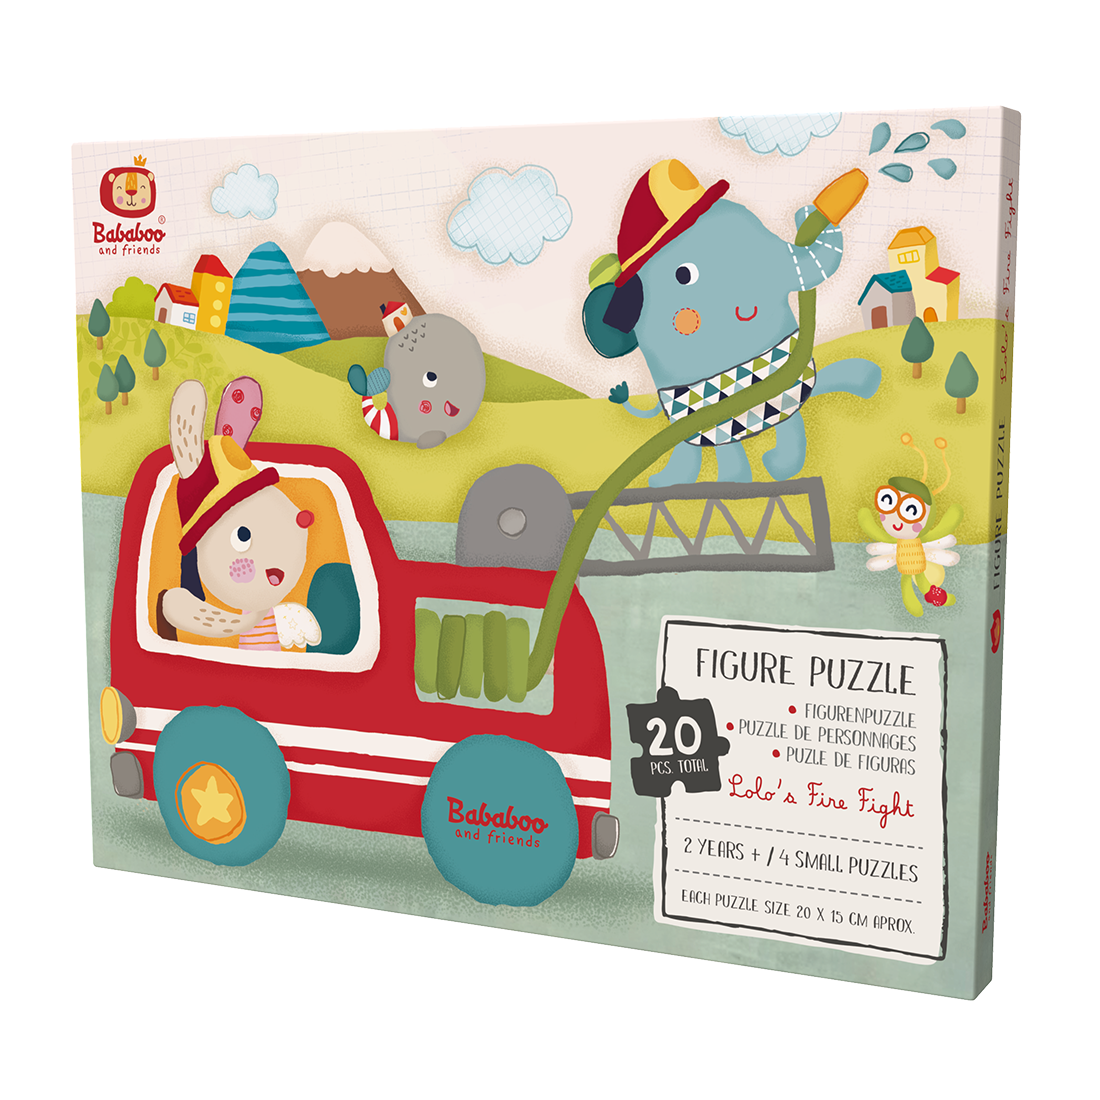 Lolo's Fire Fighter Figure Puzzle packaging front